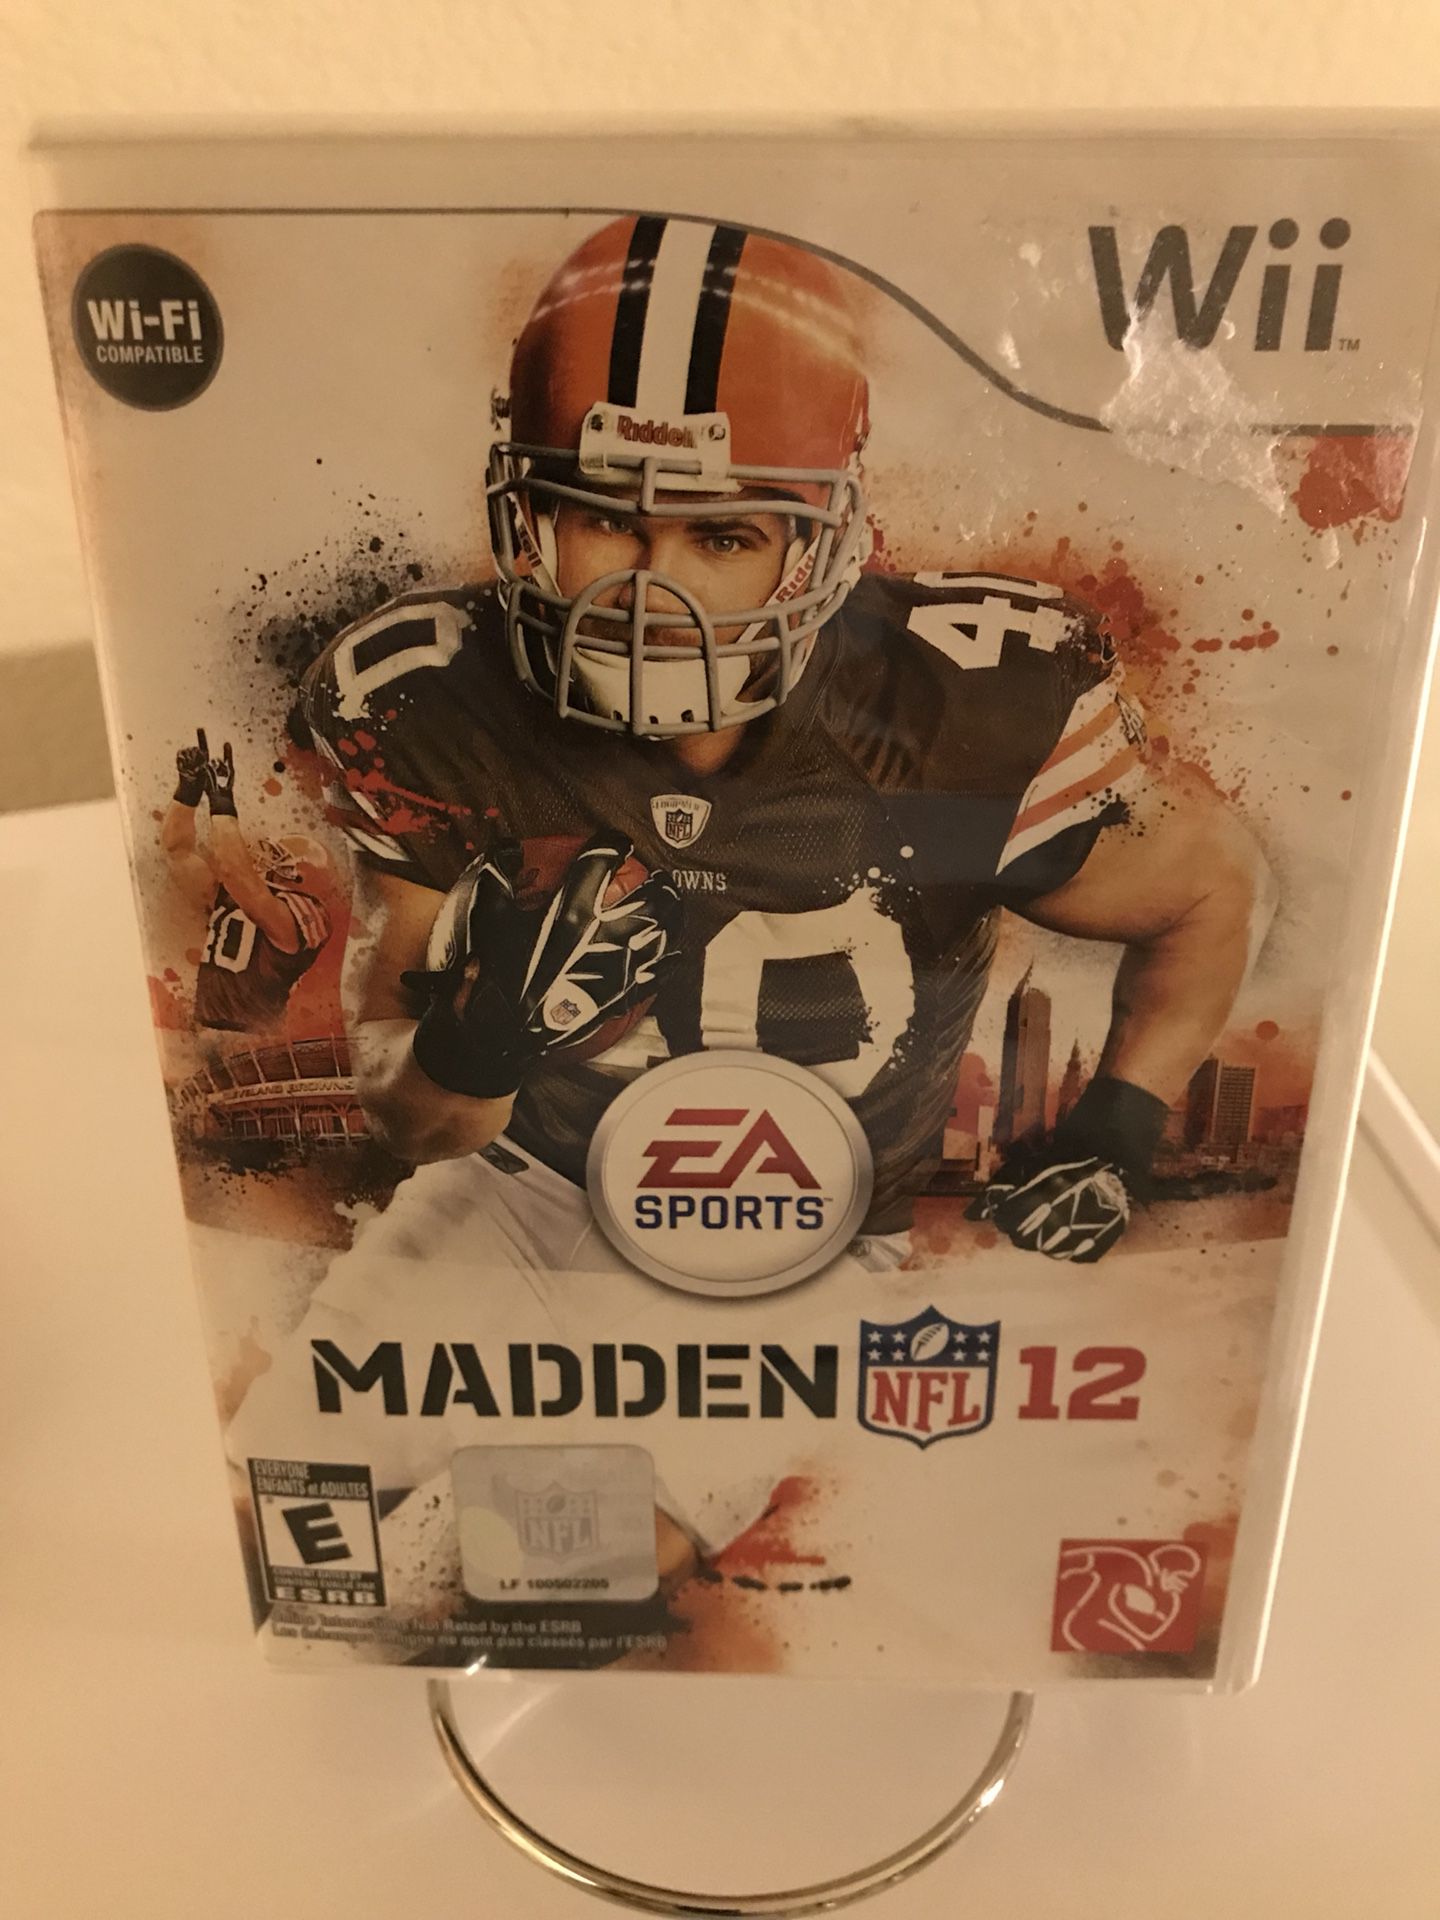 Wii Madden NFL 12 Game.$4 for Sale in Goodyear, AZ - OfferUp